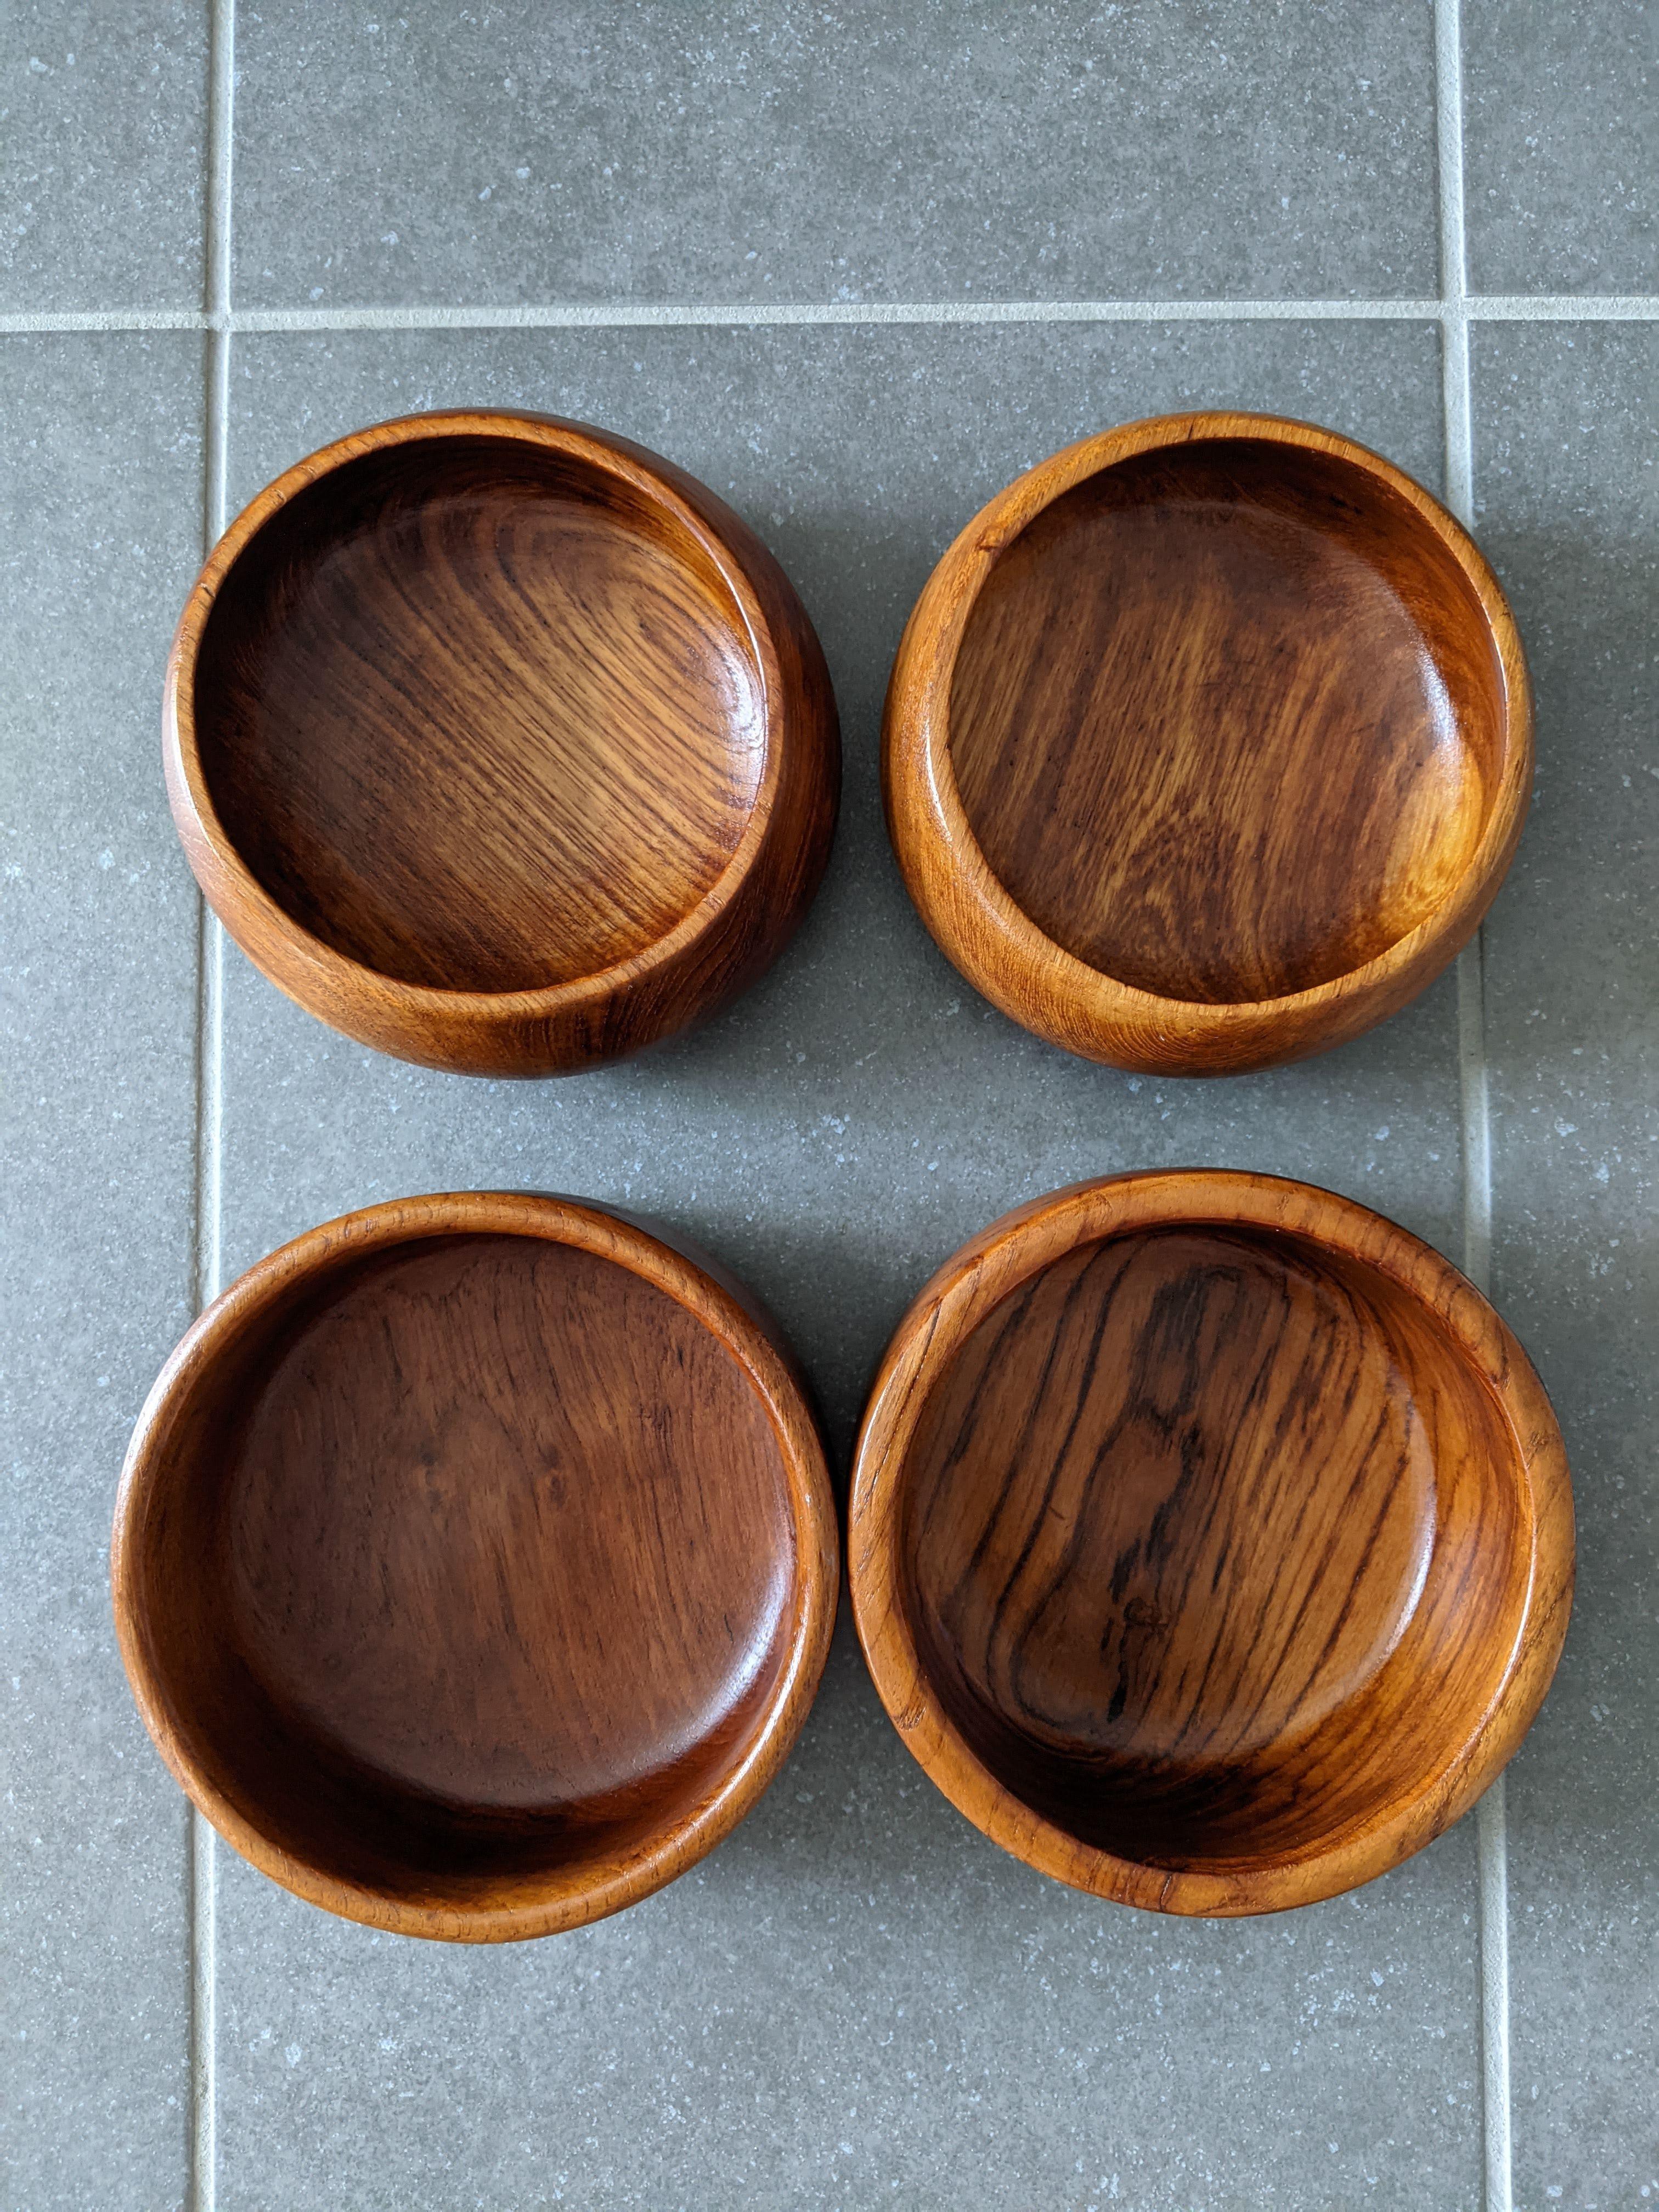 Set of 4 teak bowls in the style of Jens Quistgaard for Dansk.

2 bowls are curved and round in shape, 2 bowls are flat and straight.

Lots of lovely teak color and figure in these bowls, look great from any angle.